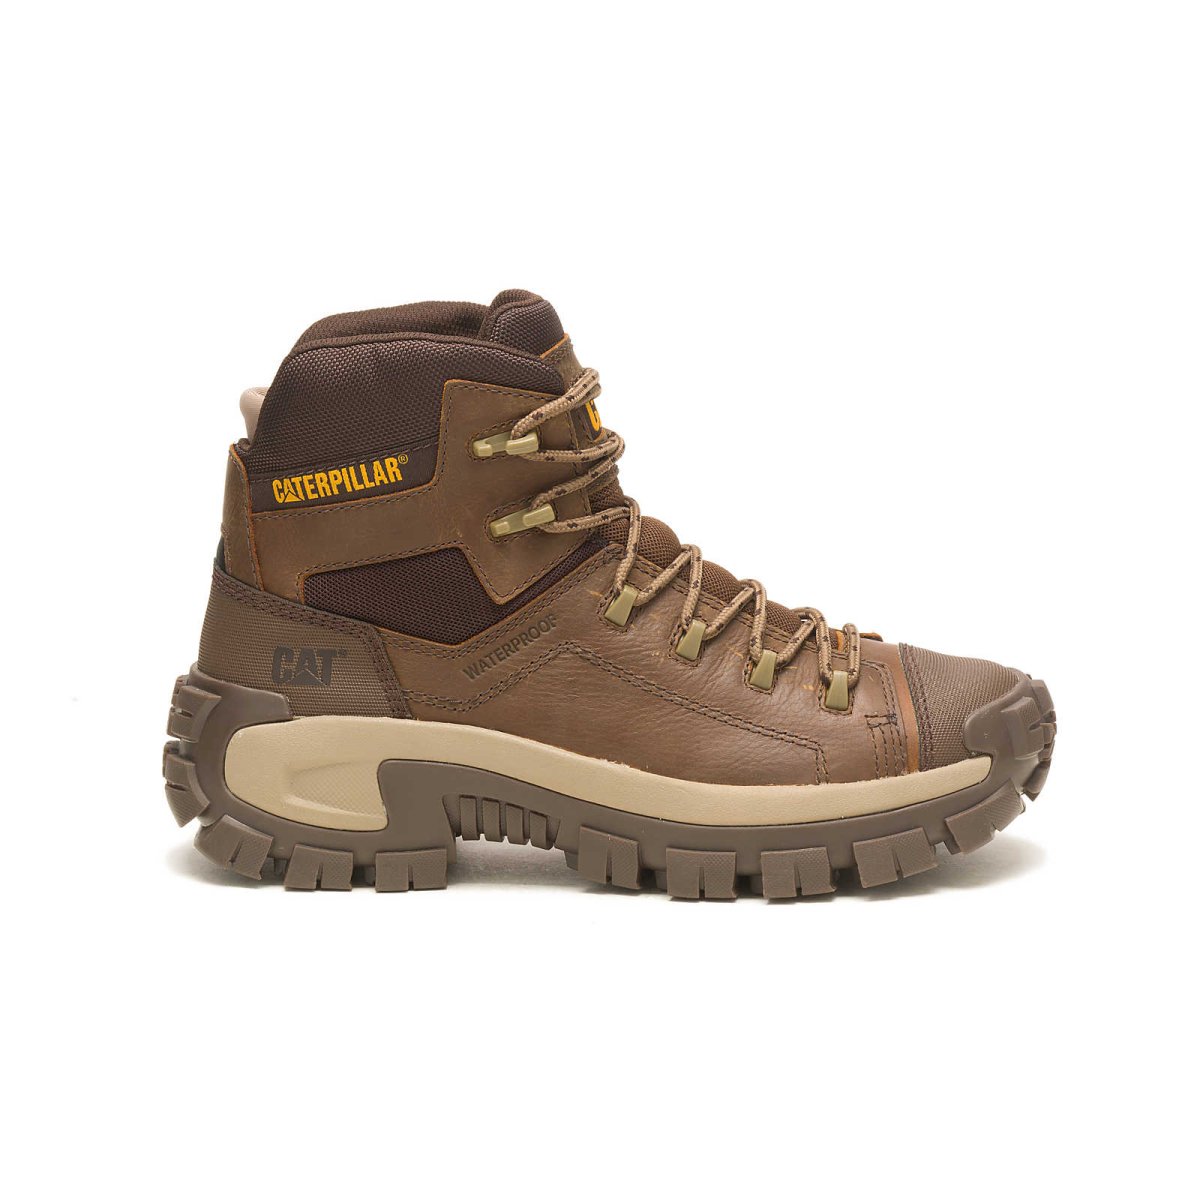 CATERPILLAR INVADER HIKER WATERPROOF SOFT TOE MEN'S WORK BOOT (P51083) IN PYRAMID - TLW Shoes